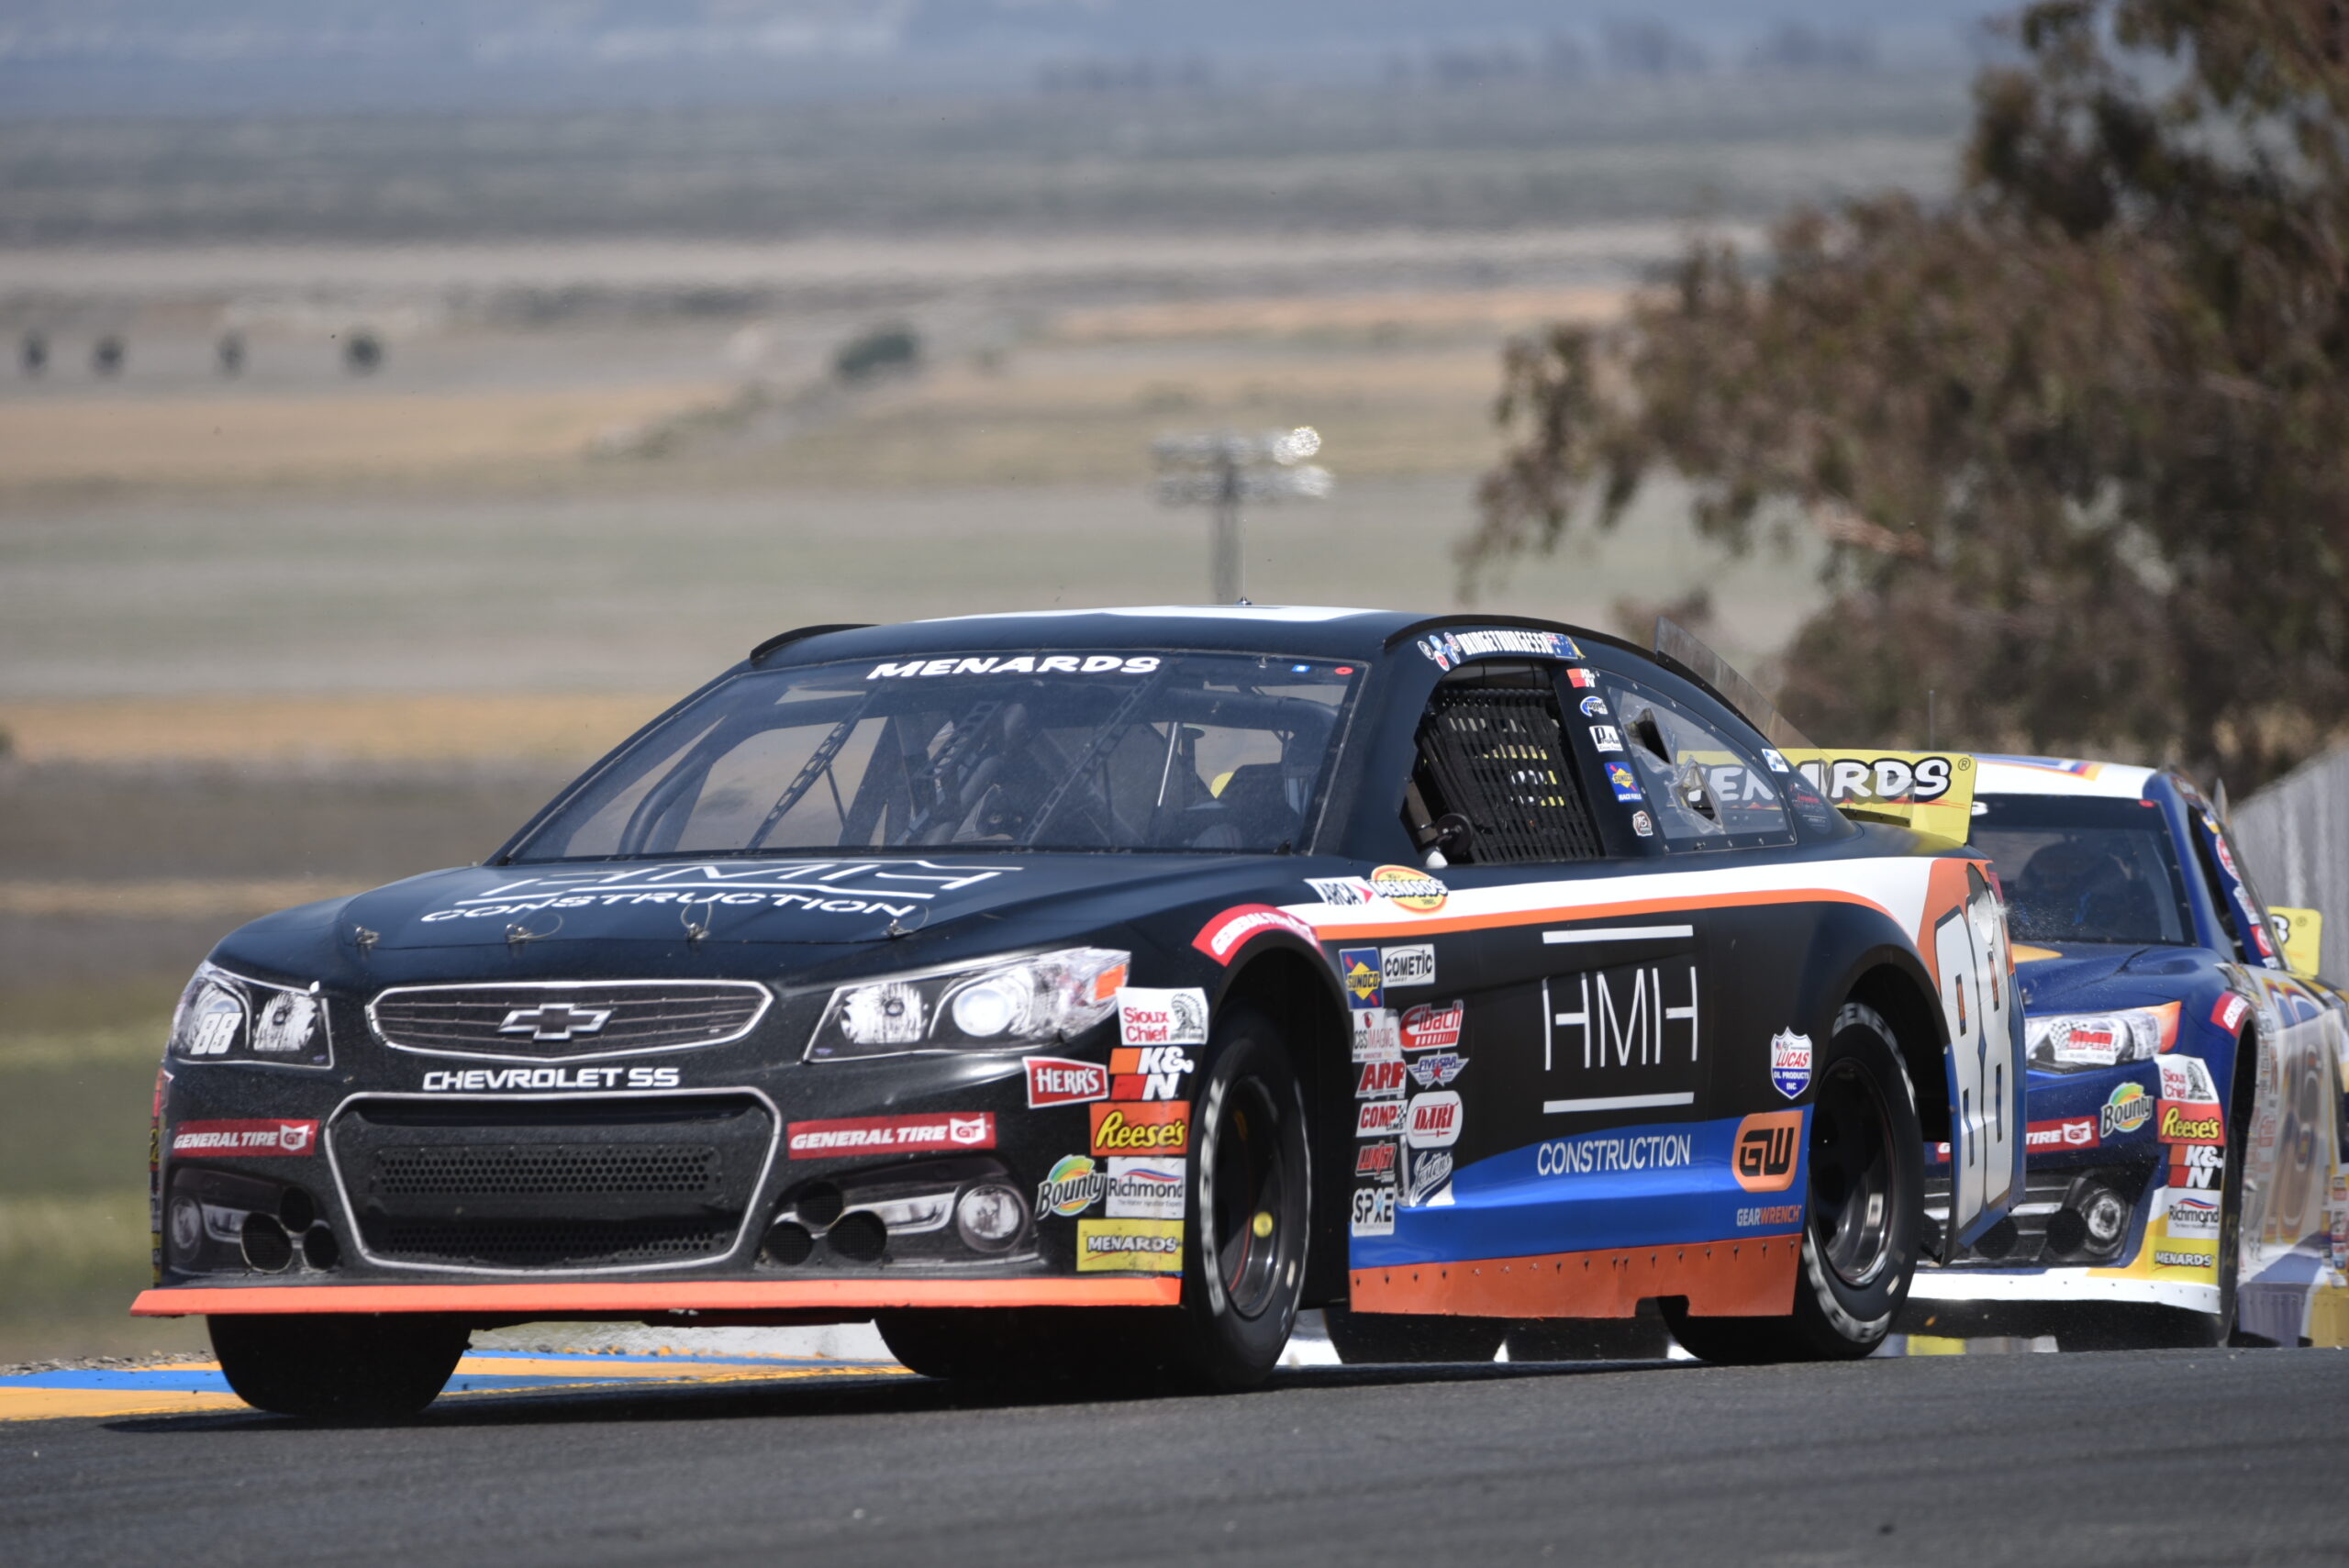 Meanwhile, Bridget Burgess loves road course racing like at Sonoma. (Photo: Luis Torres/The Podium Finish)